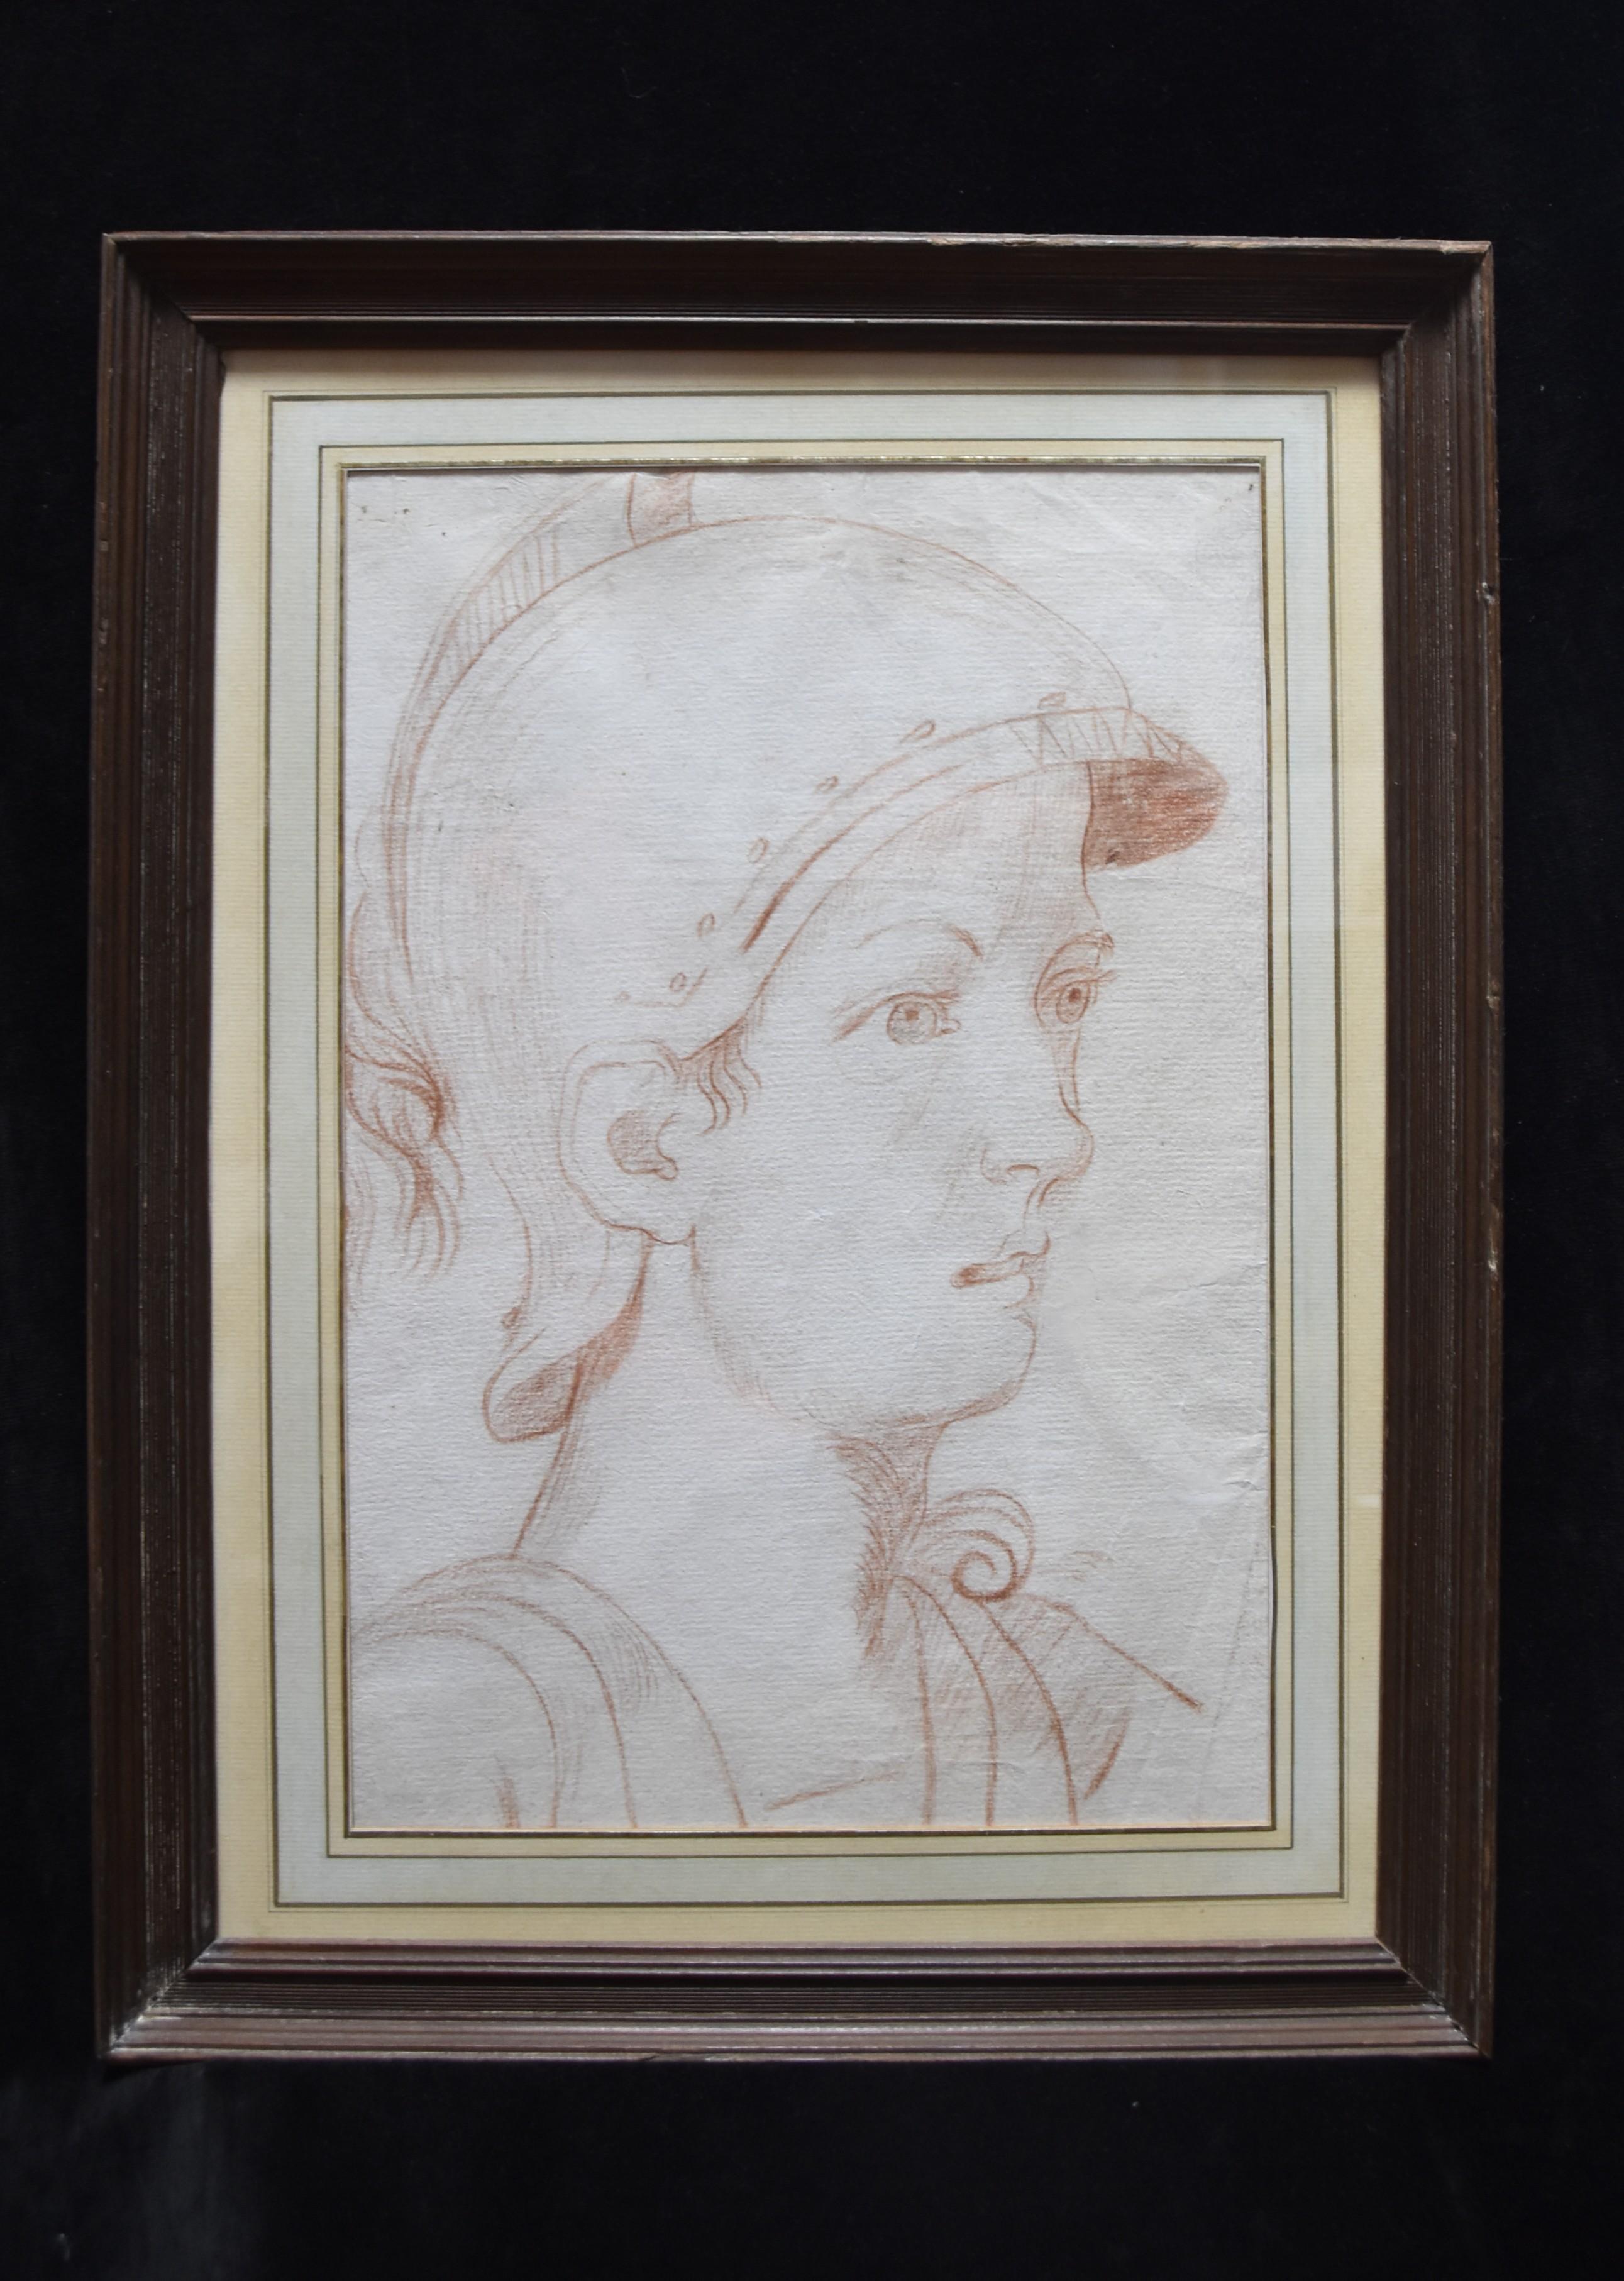 Italian School 18th century,  An Ancient soldier in profile, red chalk on paper - Gray Figurative Art by Unknown